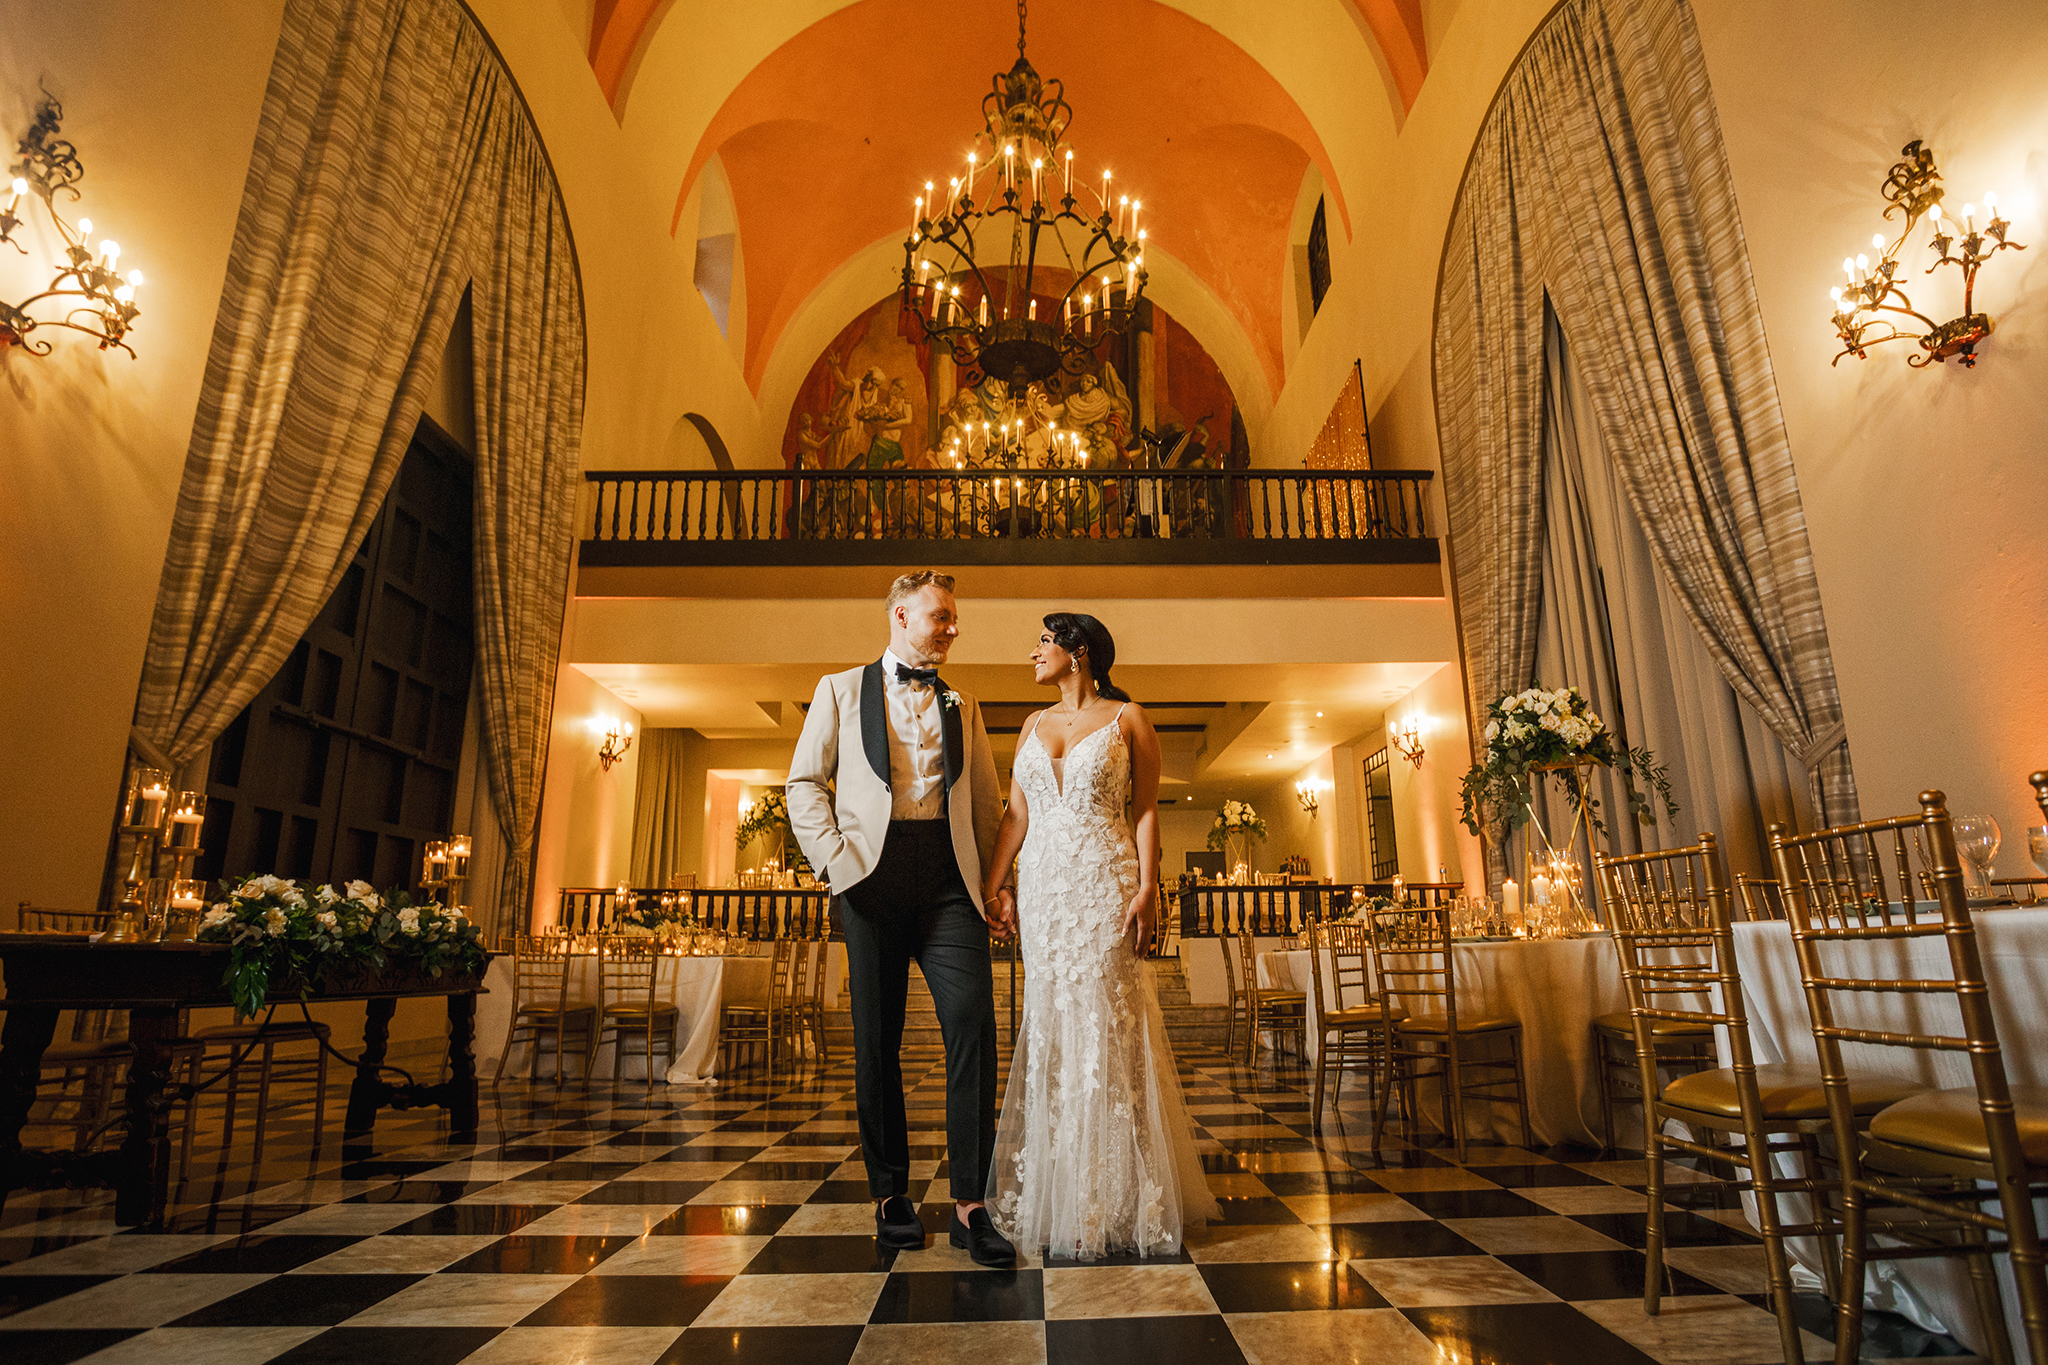 A destination wedding couple standing in an ornate room.